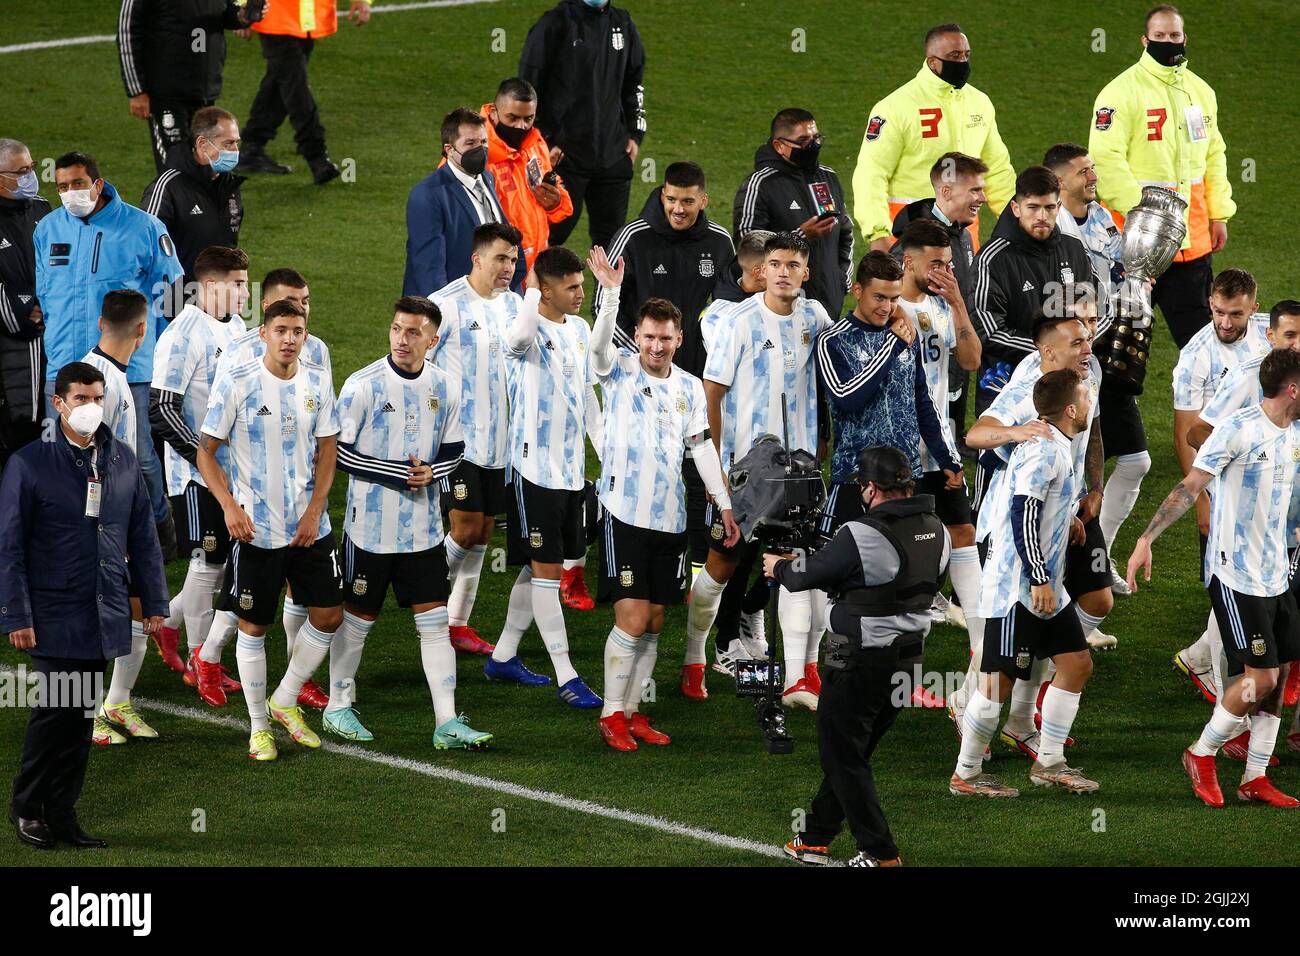 Buenos Aires, Argentina. 09th Sep, 2021. BUENOS AIRES - SEPTEMBER 9: Forward Lionel Messi (10) of Argentina celebrates with his teammates and fans after a match between Argentina and Bolivia as part of South American Qualifiers for Qatar 2022 at Estadio Monumental Antonio Vespucio Liberti on September 9, 2021 in Buenos Aires, Argentina. (Photo by Florencia Tan Jun/PxImages) Credit: Px Images/Alamy Live News Stock Photo